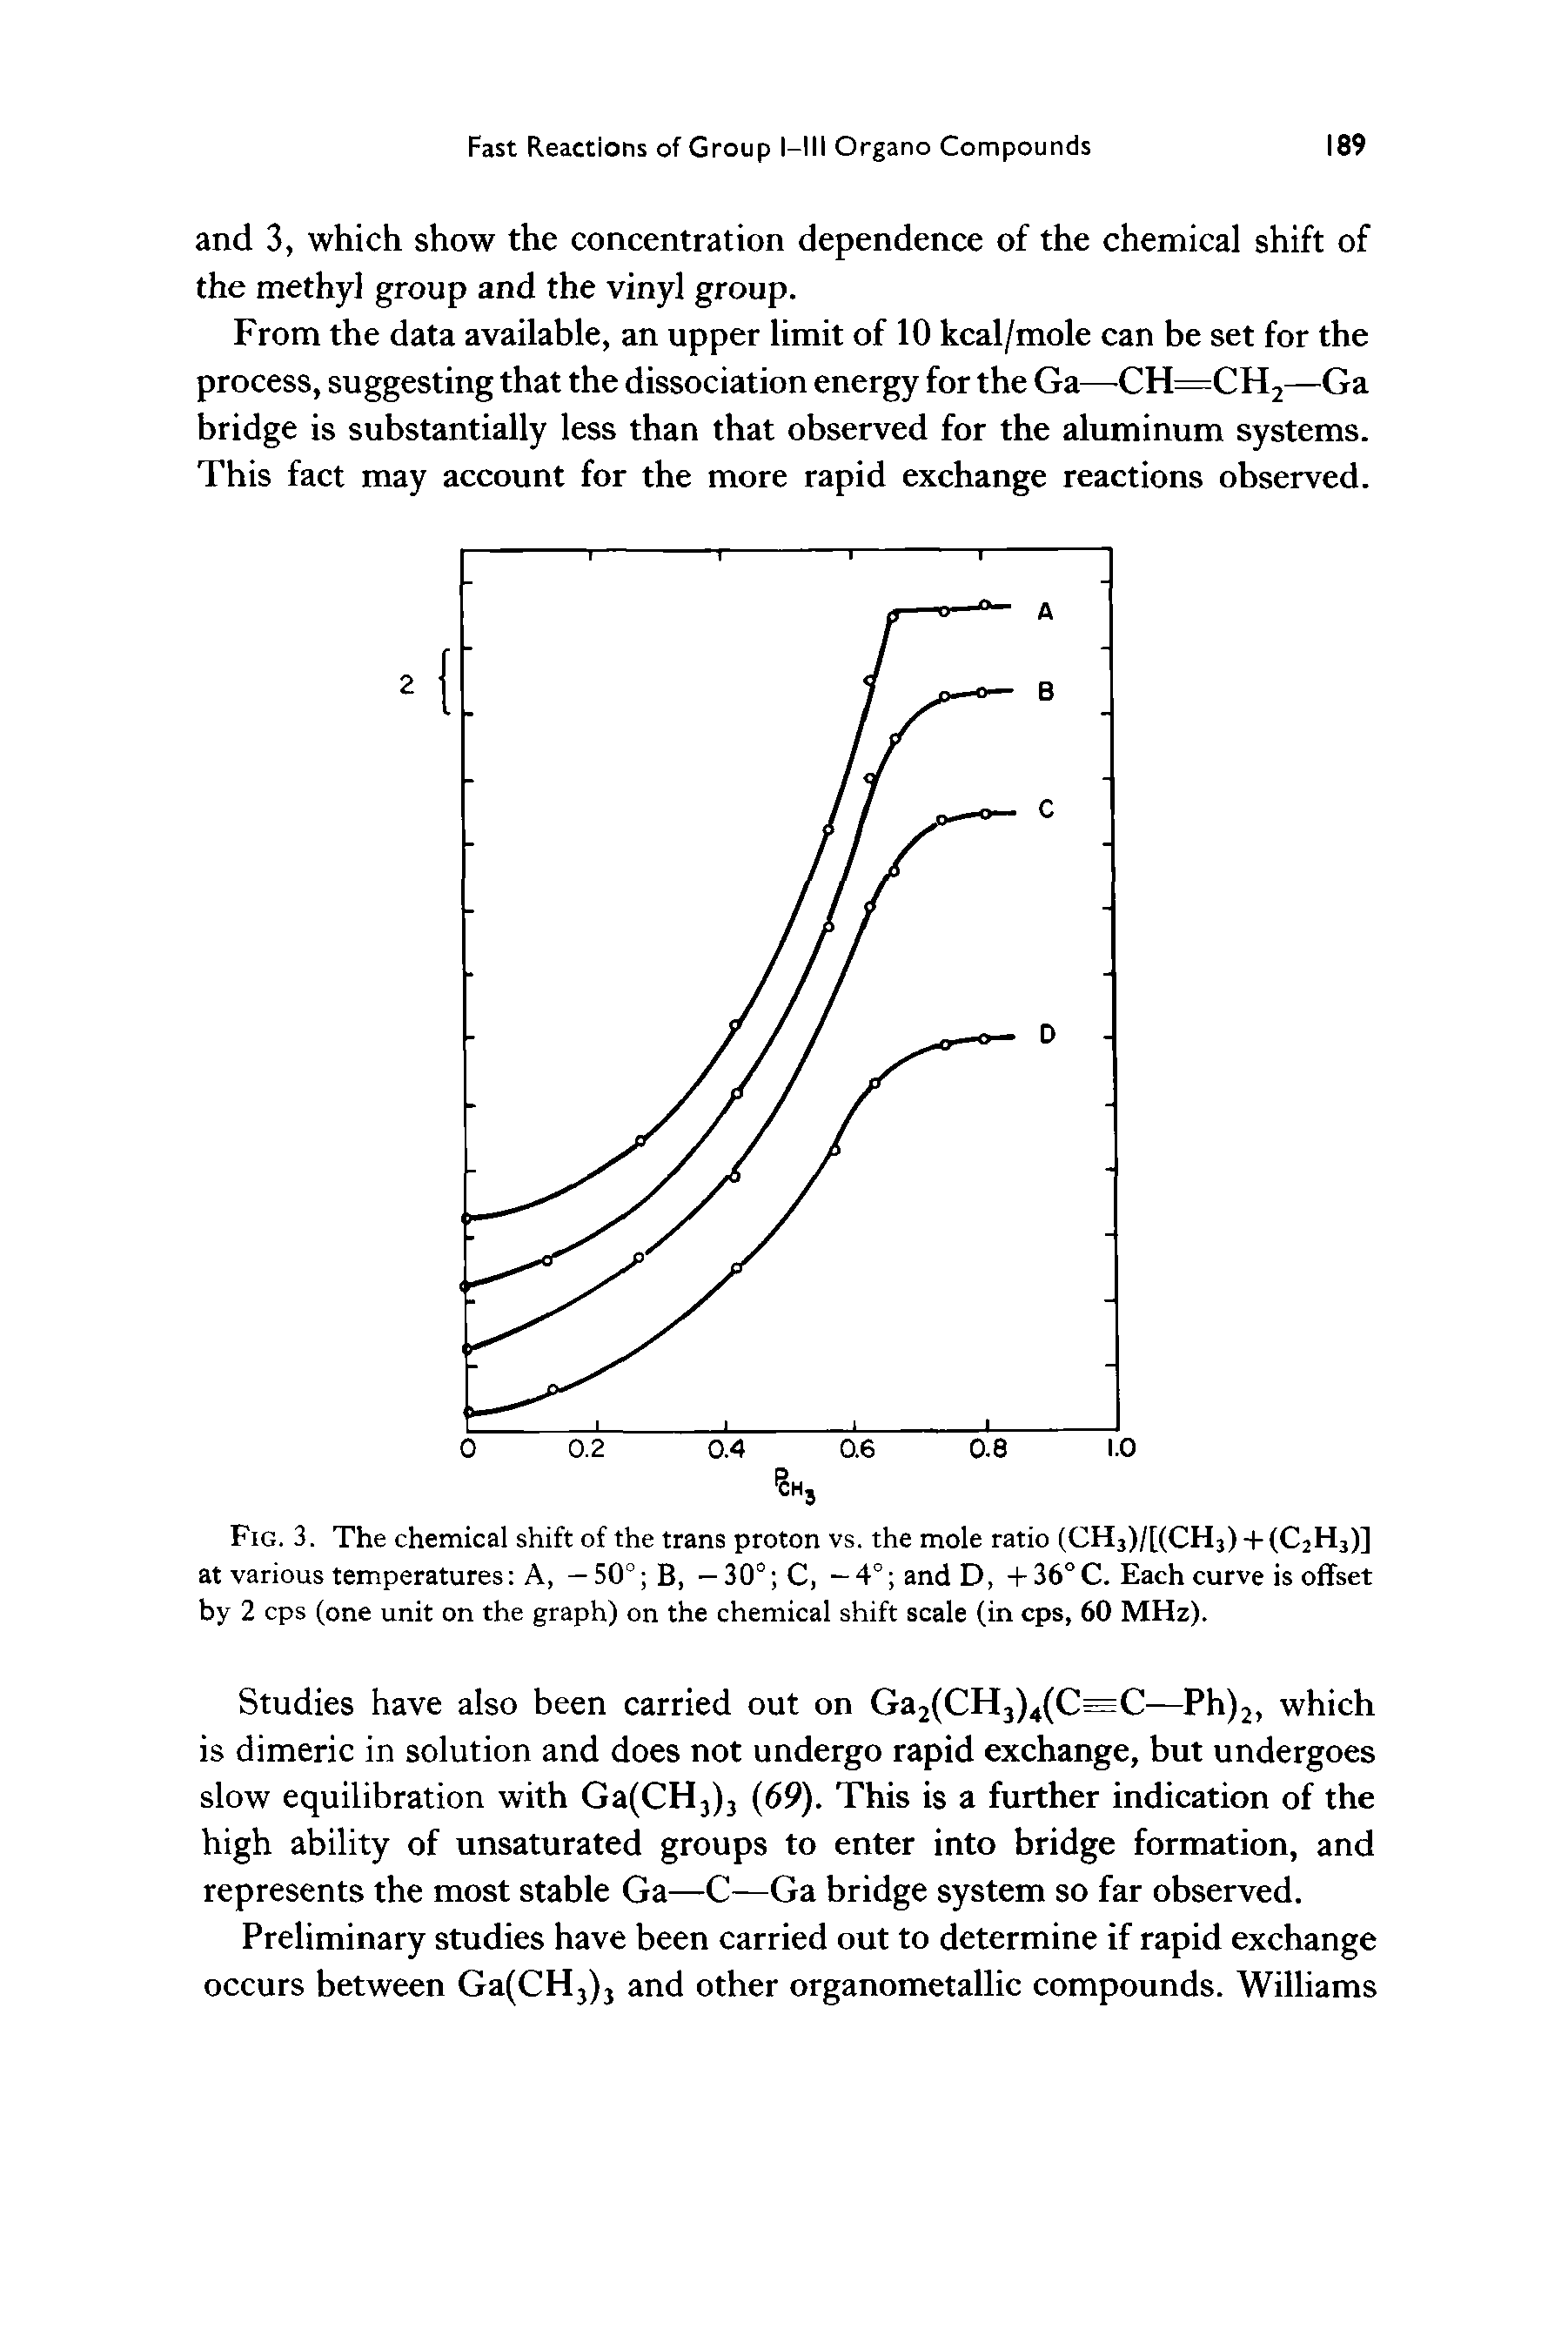 Fig. 3. The chemical shift of the trans proton vs. the mole ratio (CH3)/[(CH3) + (C2H3)] at various temperatures A, — 50° B, —30° C, —4° andD, +36°C. Each curve is offset by 2 cps (one unit on the graph) on the chemical shift scale (in cps, 60 MHz).